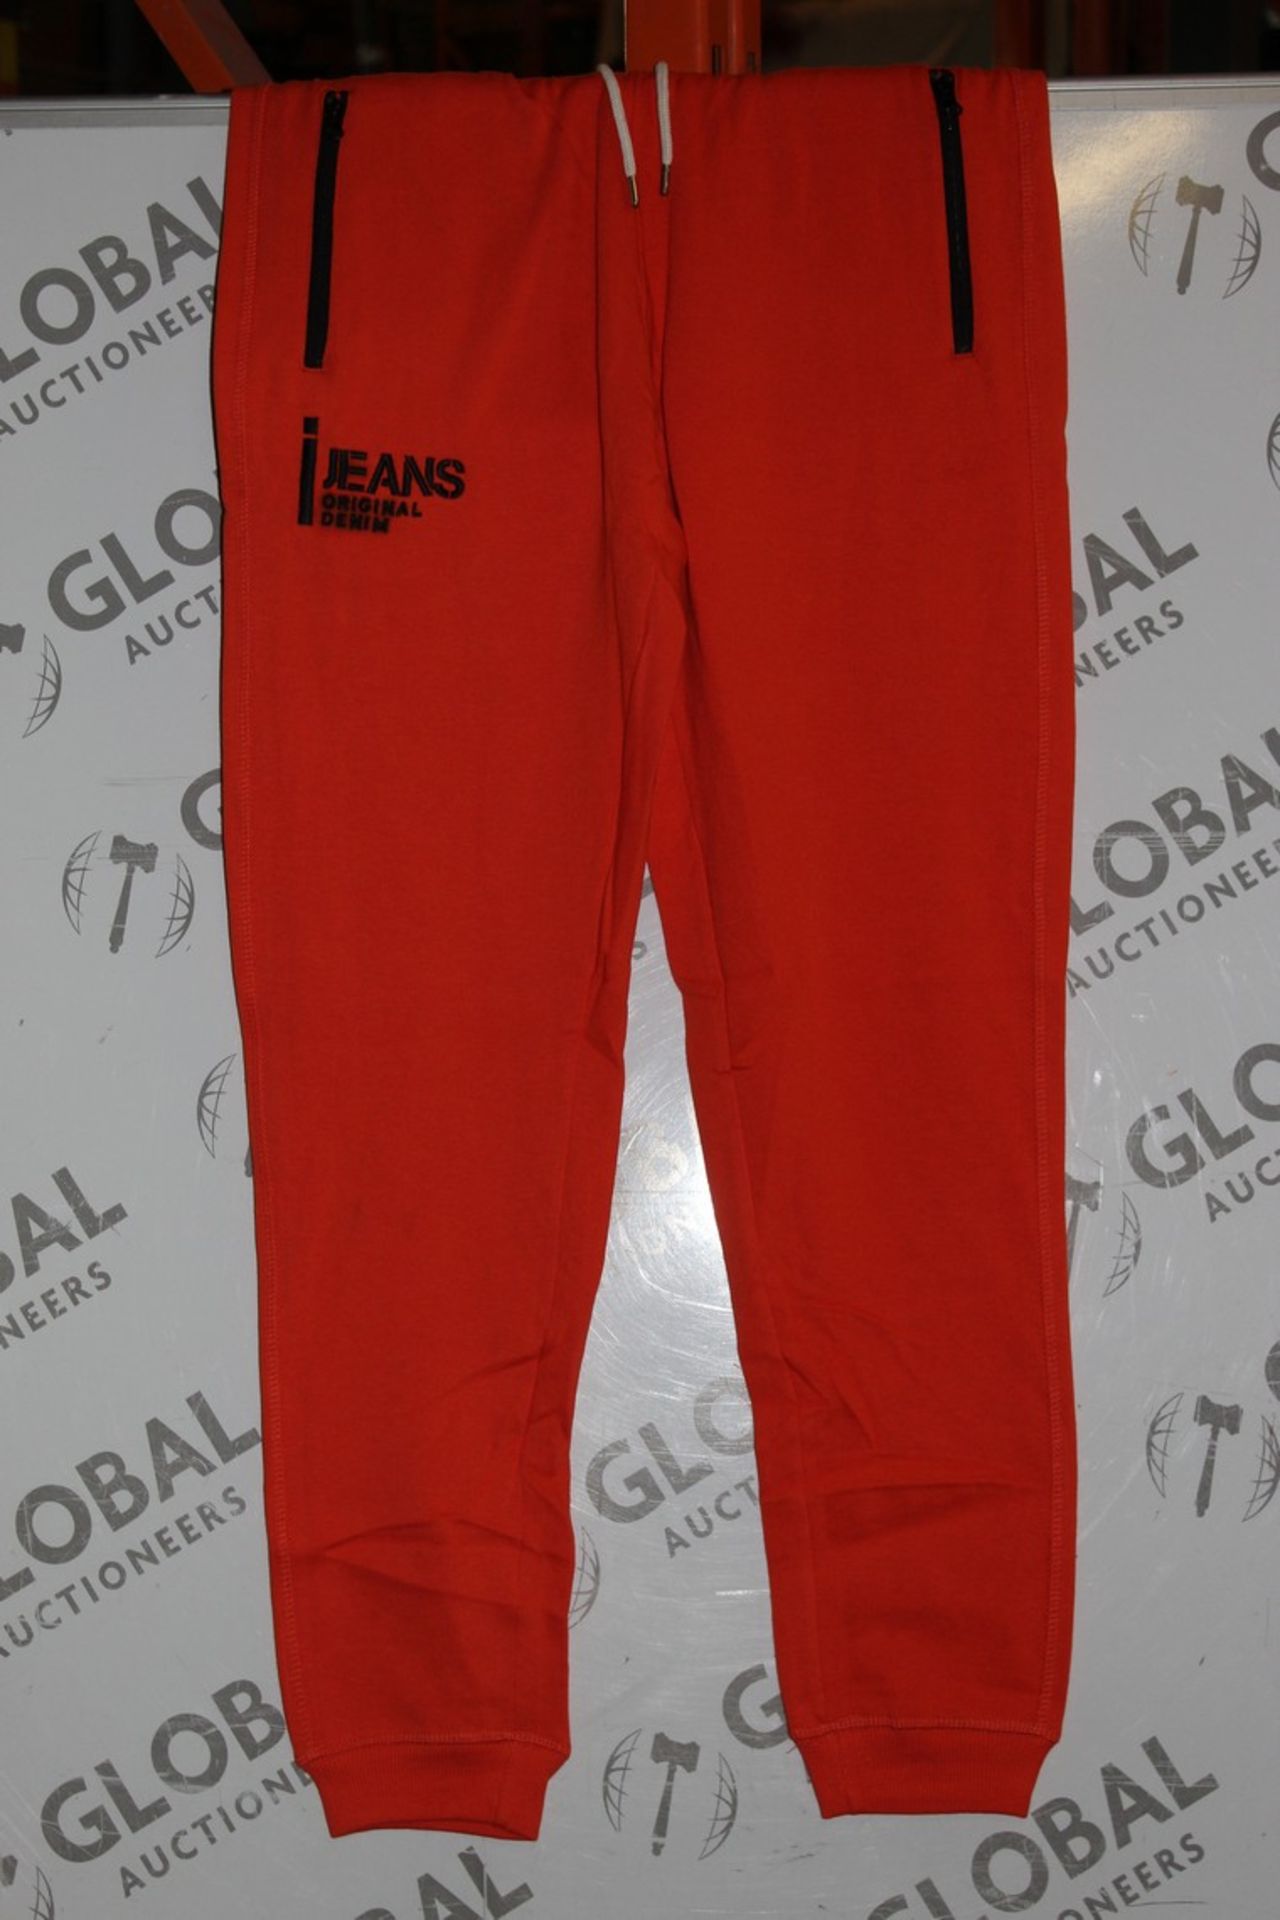 Lot to Contain 16 Brand New Pairs of Ijeans Original Denim Orange Zip Pocket Trousers in Assorted